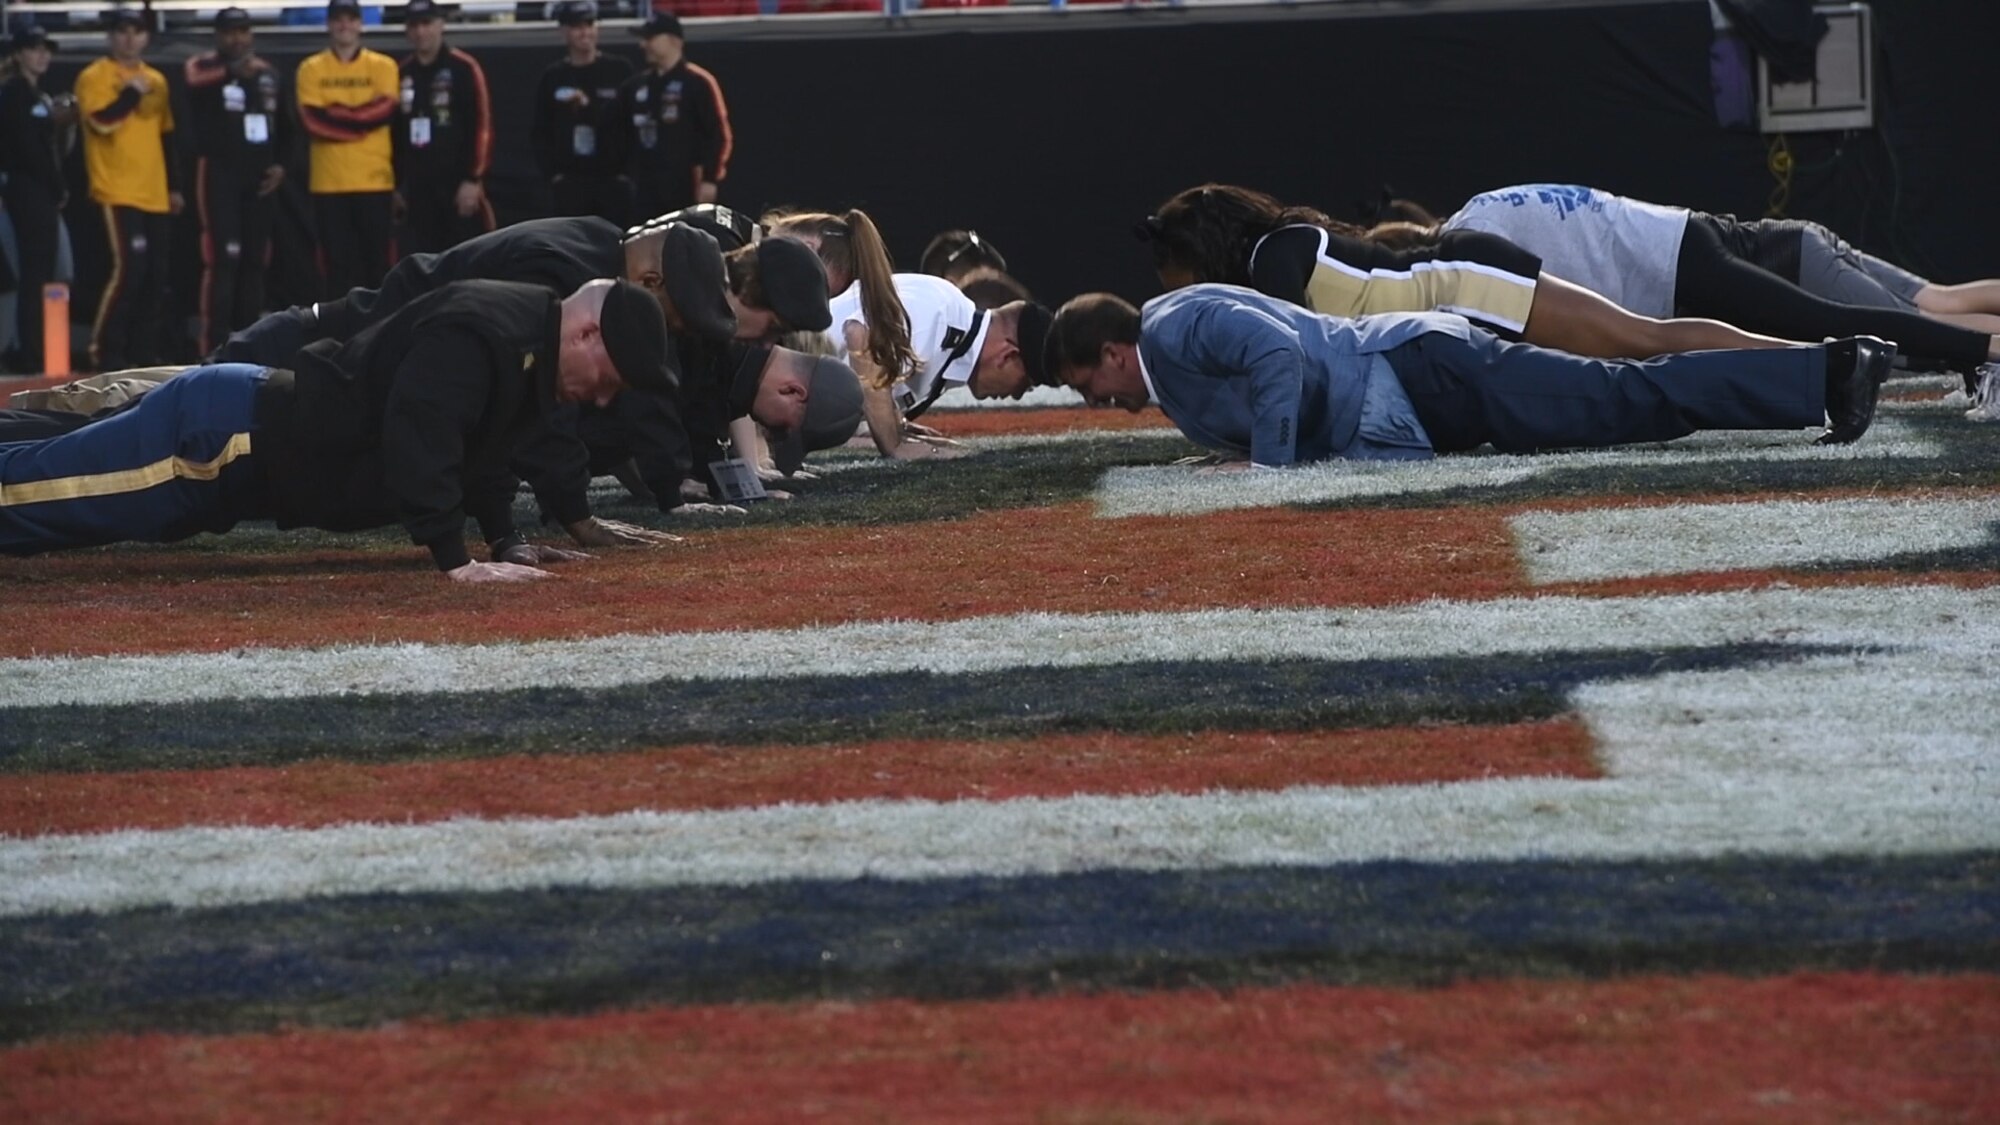 U.S. Army Soldiers perform push-ups after the Army scores, Dec. 22, 2018, at Fort Worth, Texas. The Army team scored 70 points during the Armed Forces Bowl.